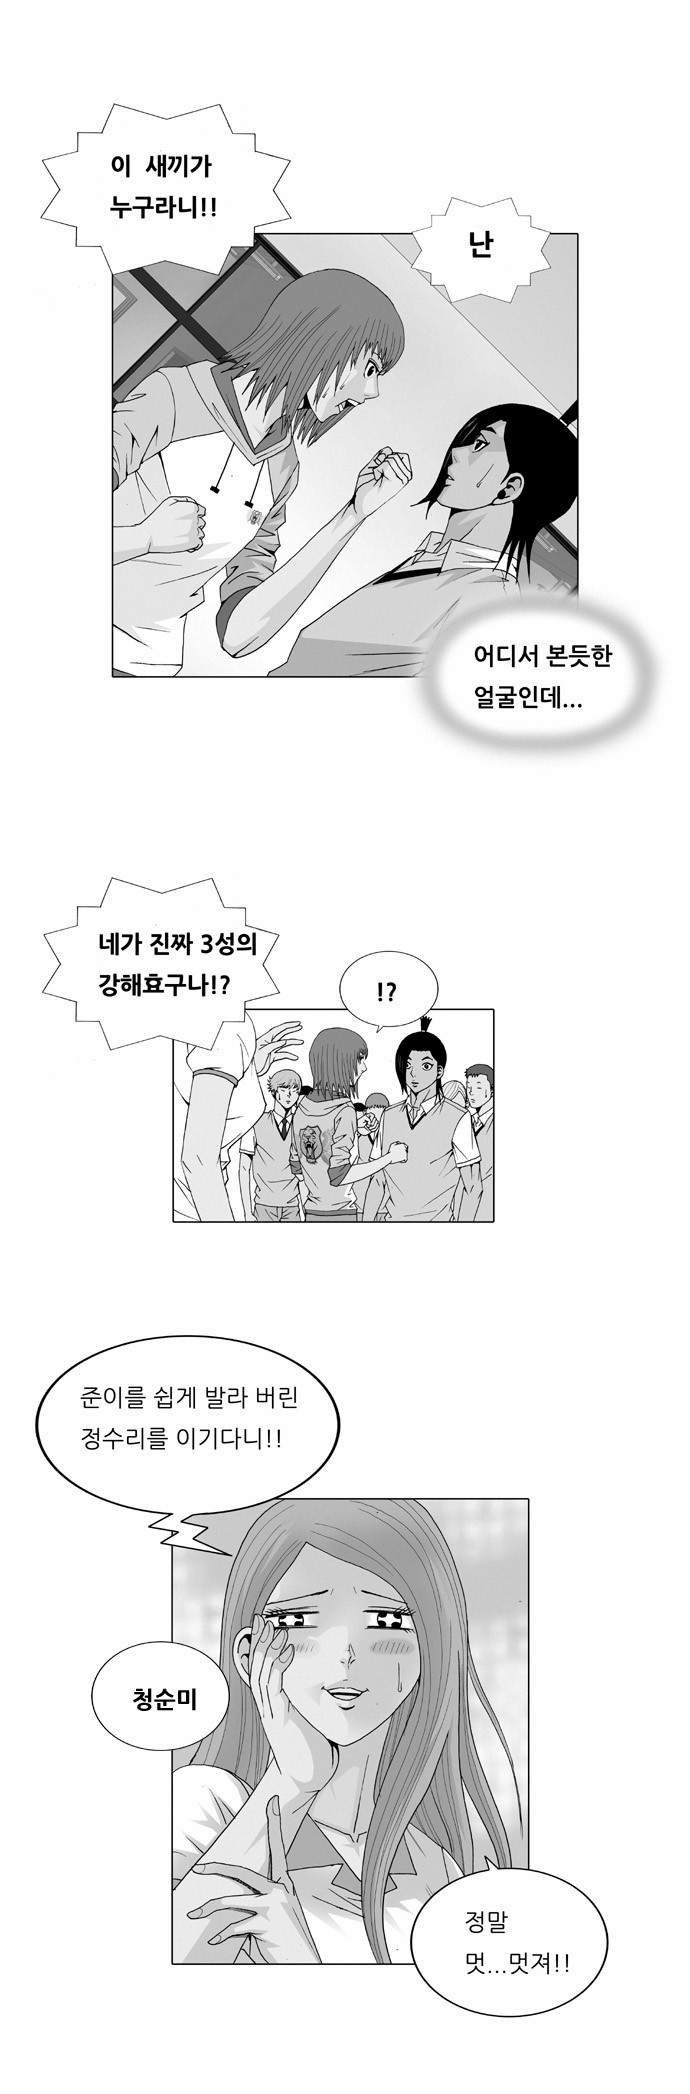 Ultimate Legend - Kang Hae Hyo - Chapter 30 - Page 1